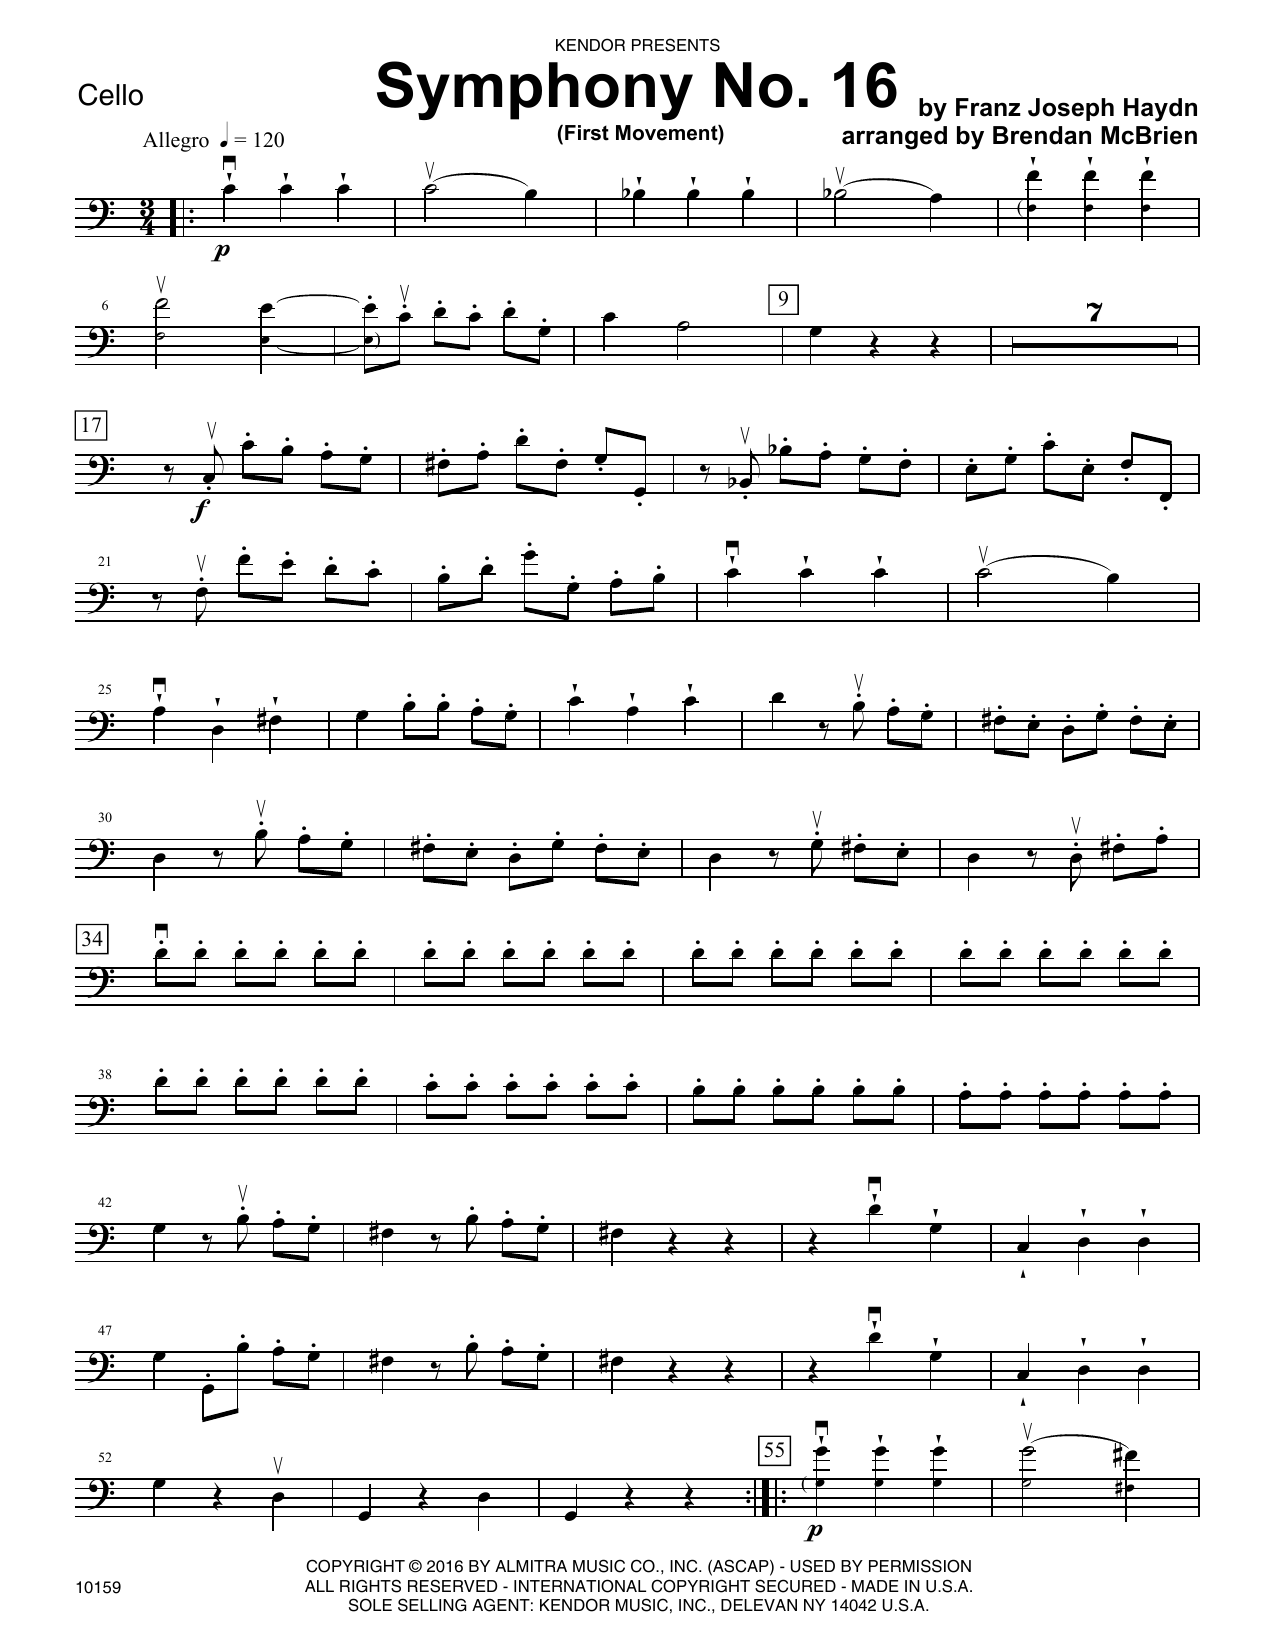 Download Brian McBrien Symphony No. 16 (First Movement) - Cell Sheet Music